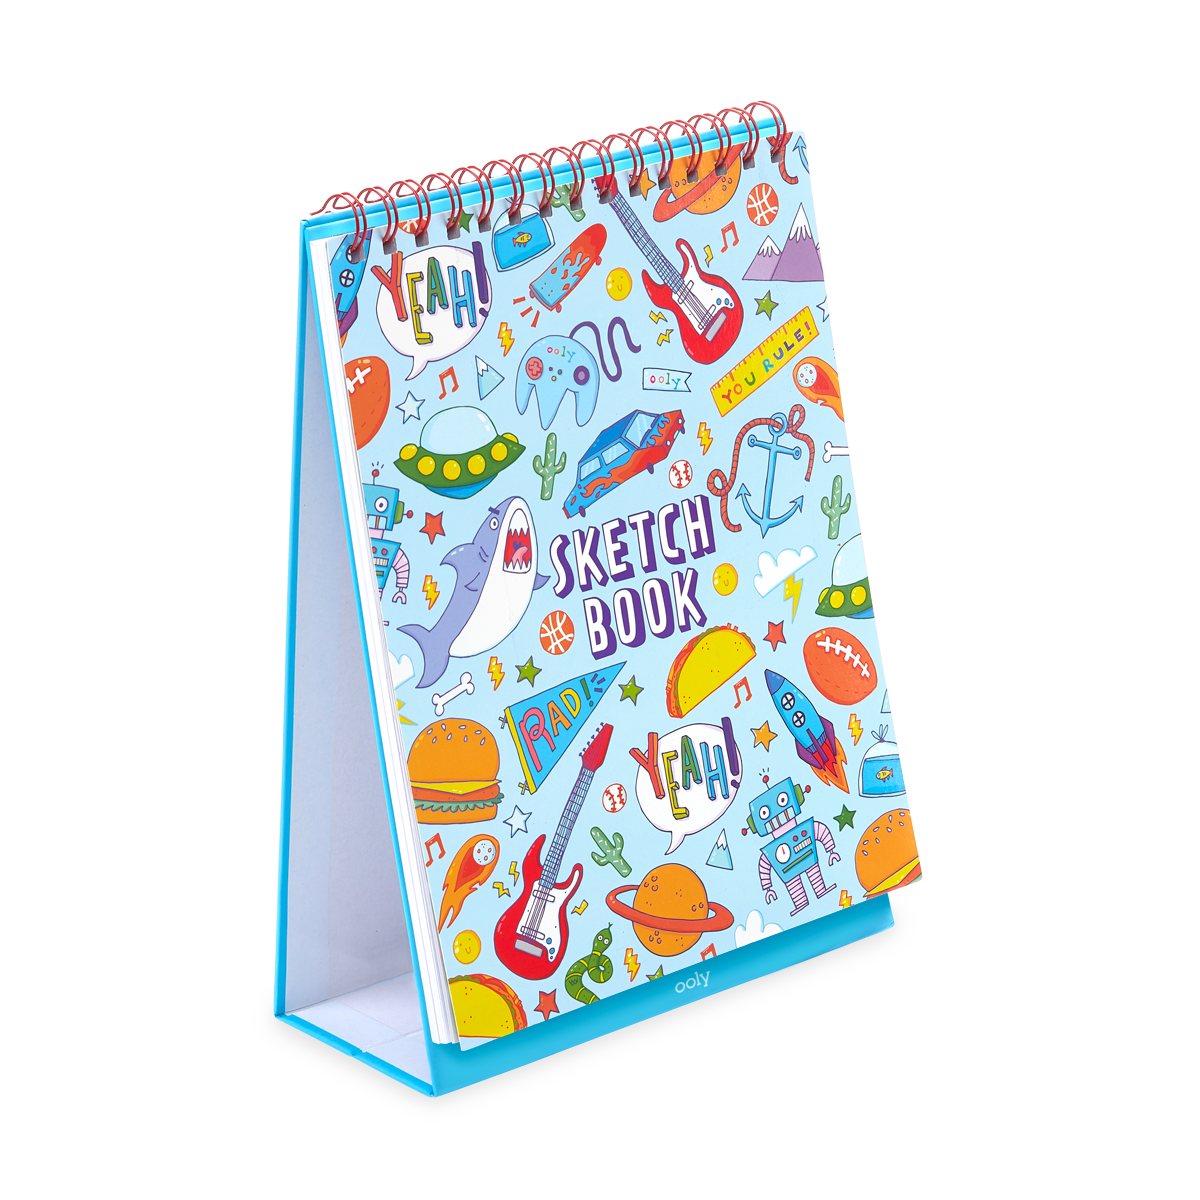 Sketch and Show Standing Sketchbook Awesome Doodle Book